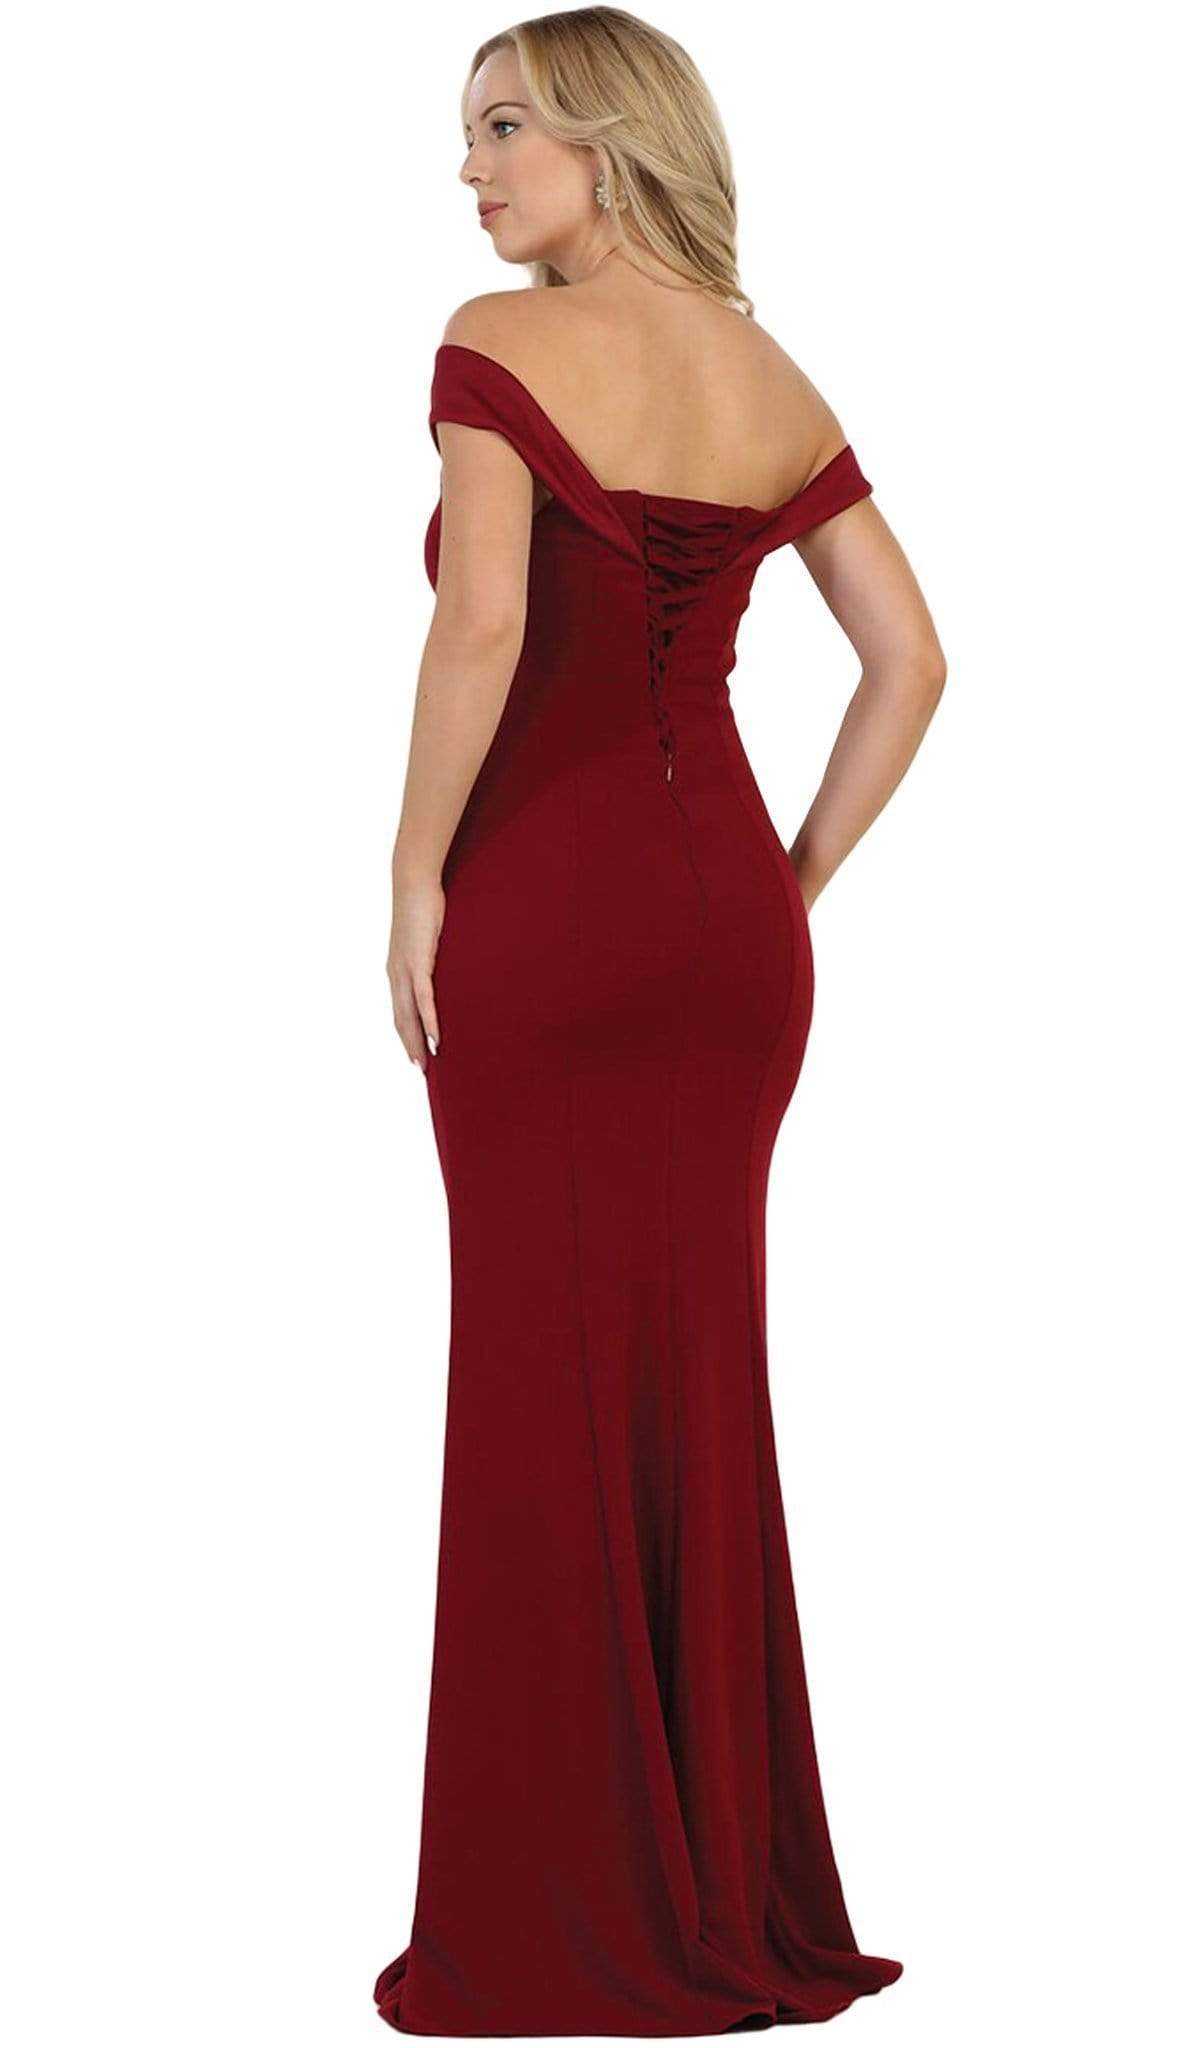 May Queen, May Queen - Fold over Off-Shoulder Sheath Dress